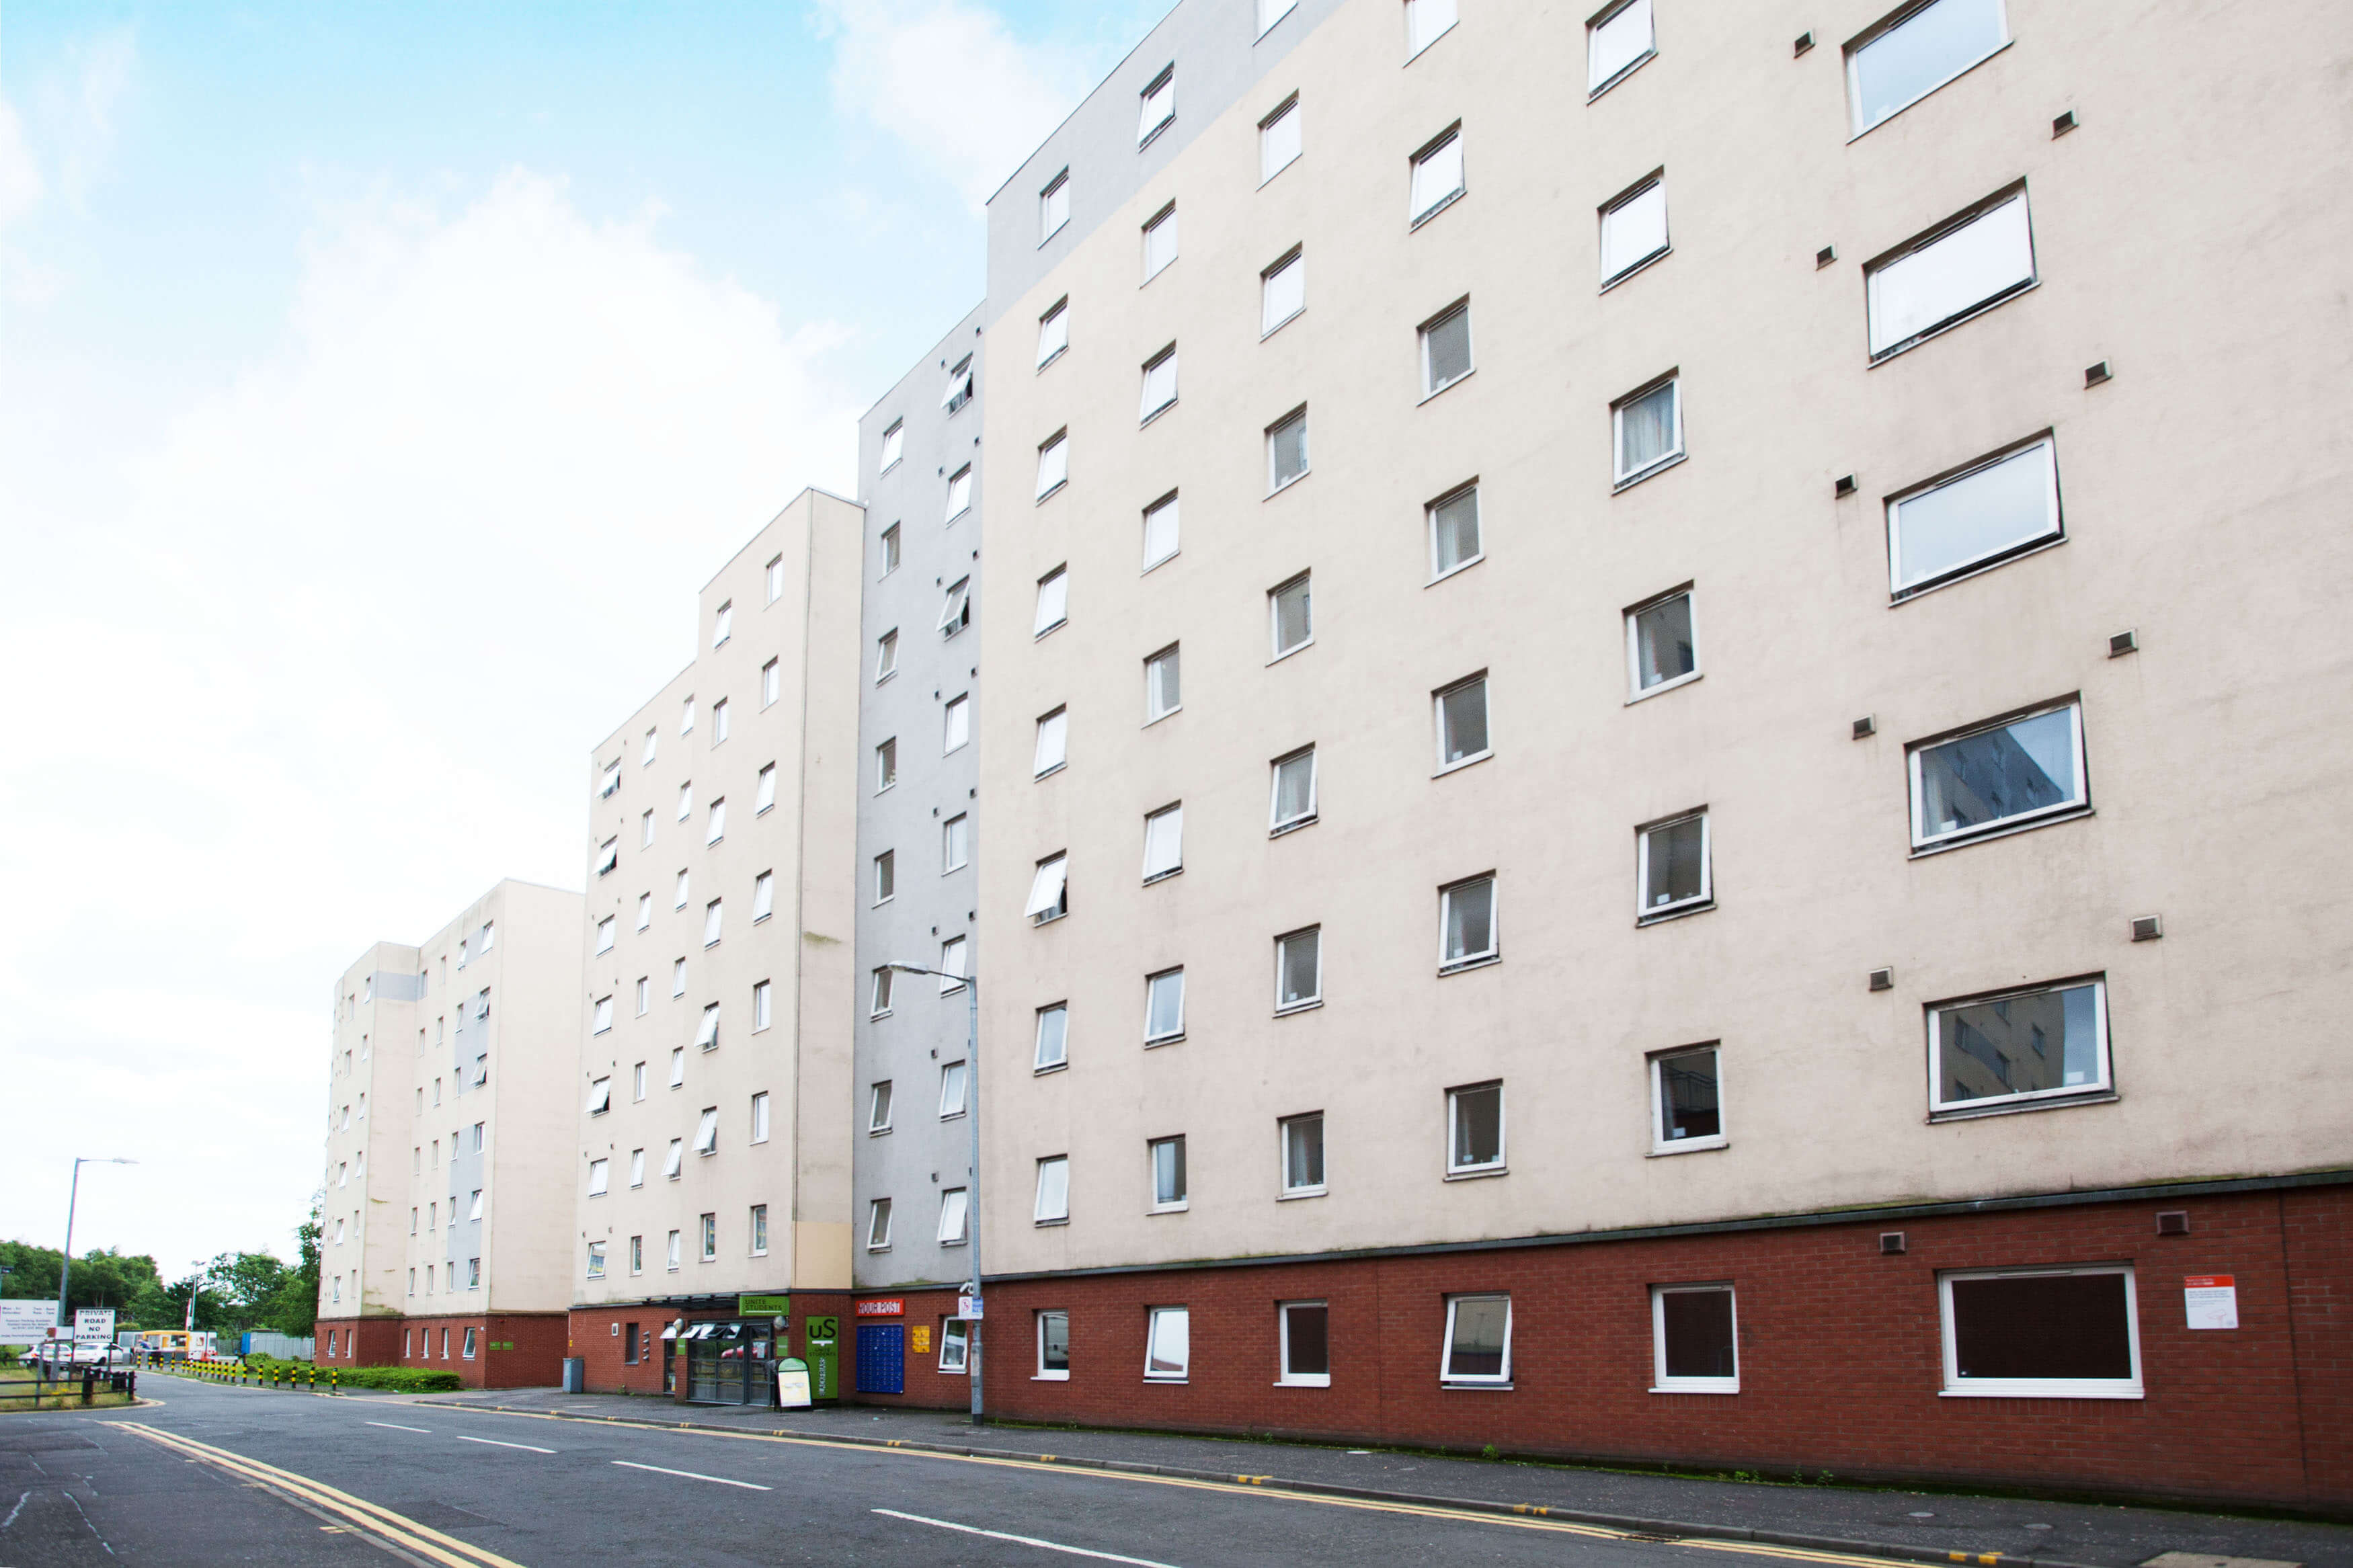 Unite Students accommodation at Blackfriars in Glasgow